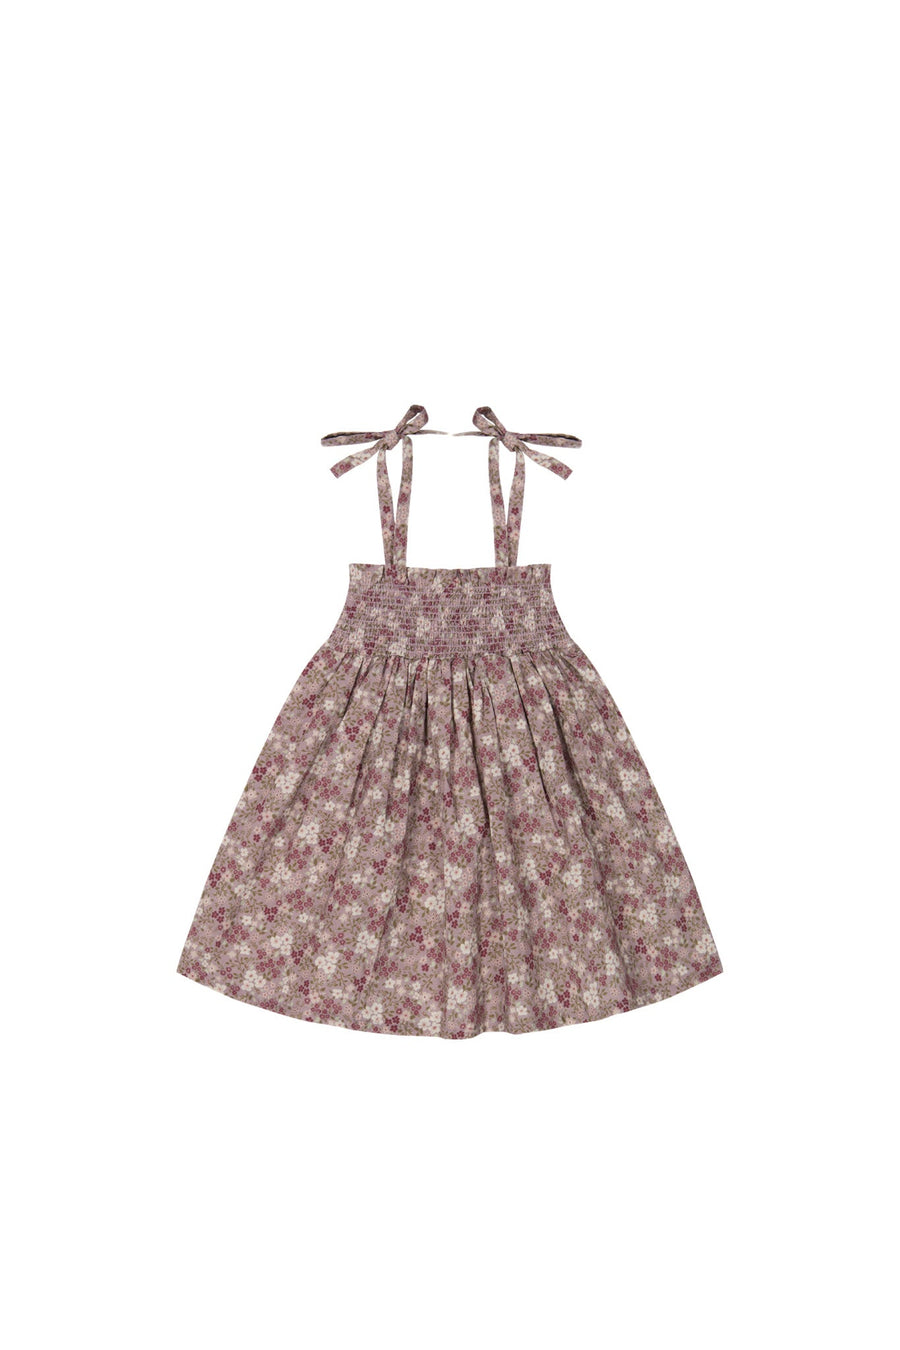 Organic Cotton Eveleigh Dress - Pansy Floral Fawn Childrens Dress from Jamie Kay NZ